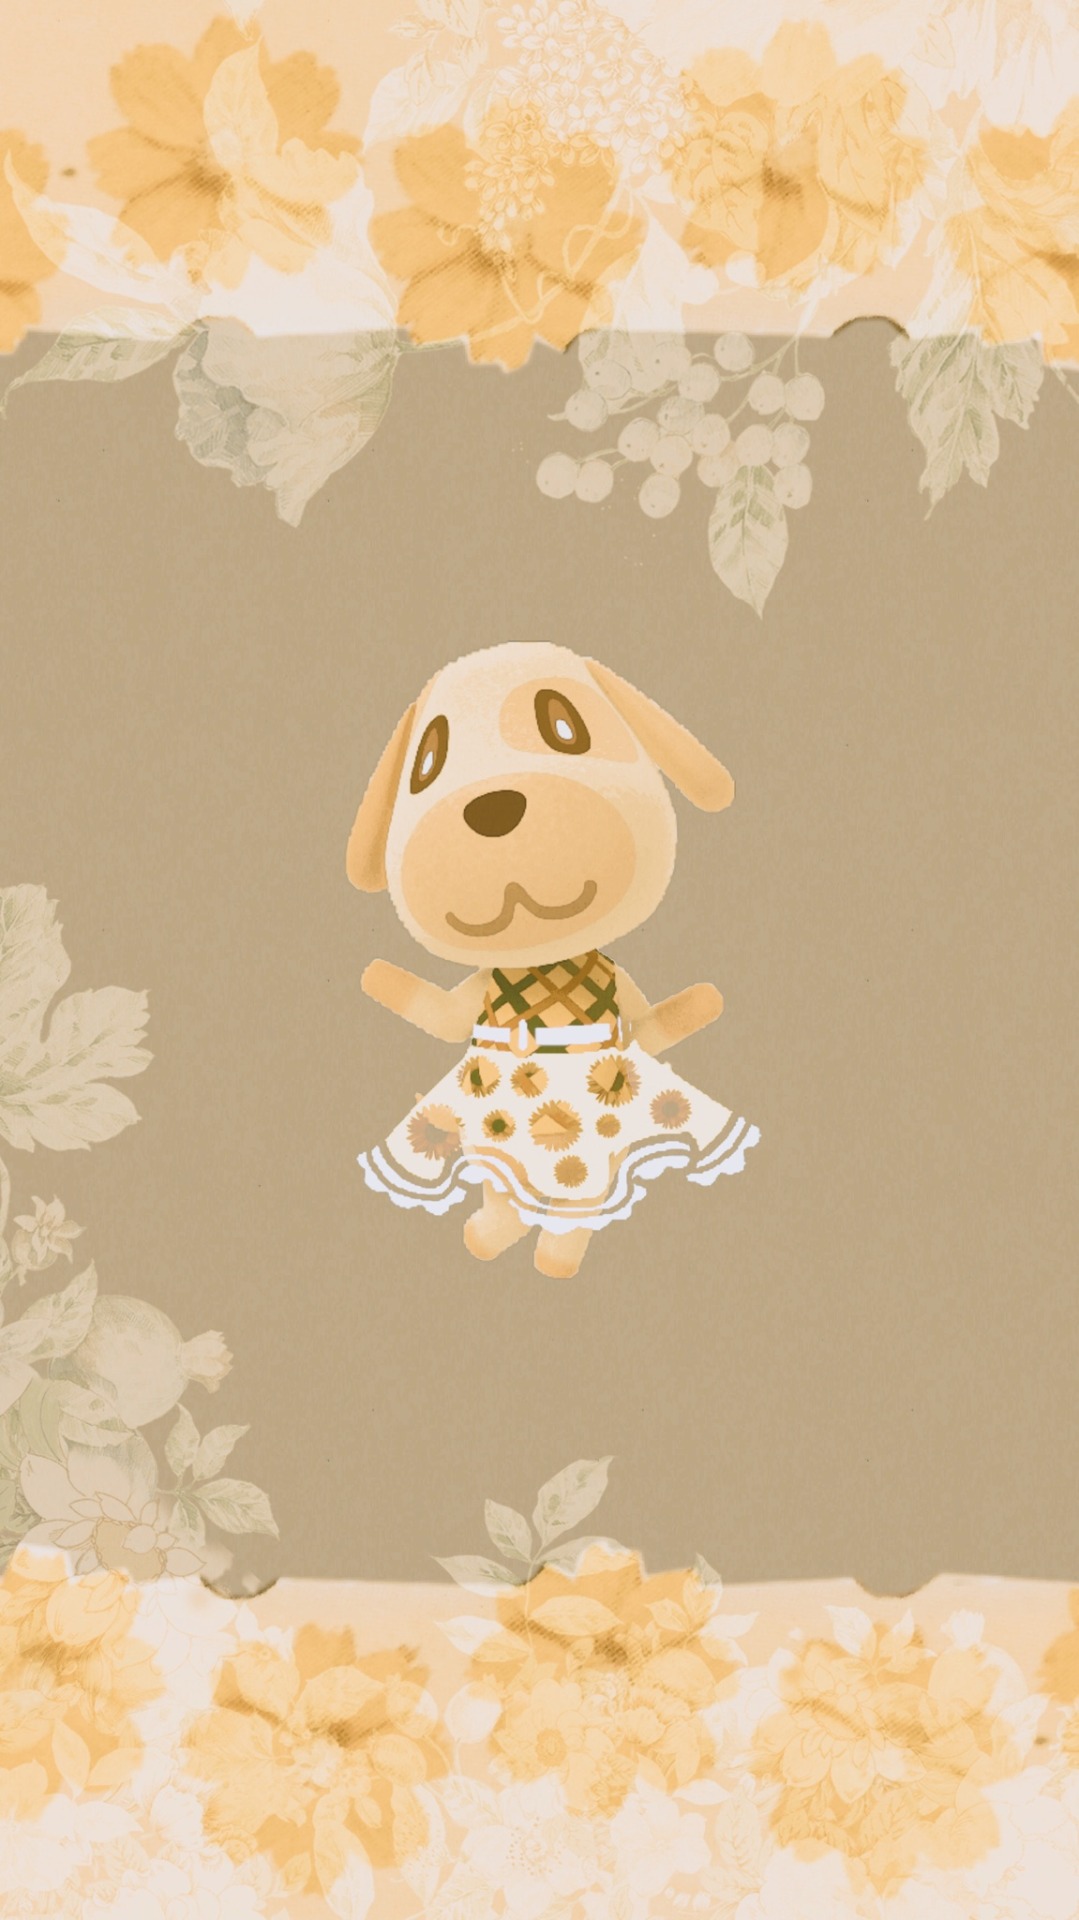 Animal Crossing New Horizons designs 20 QR codes for wallpaper and art